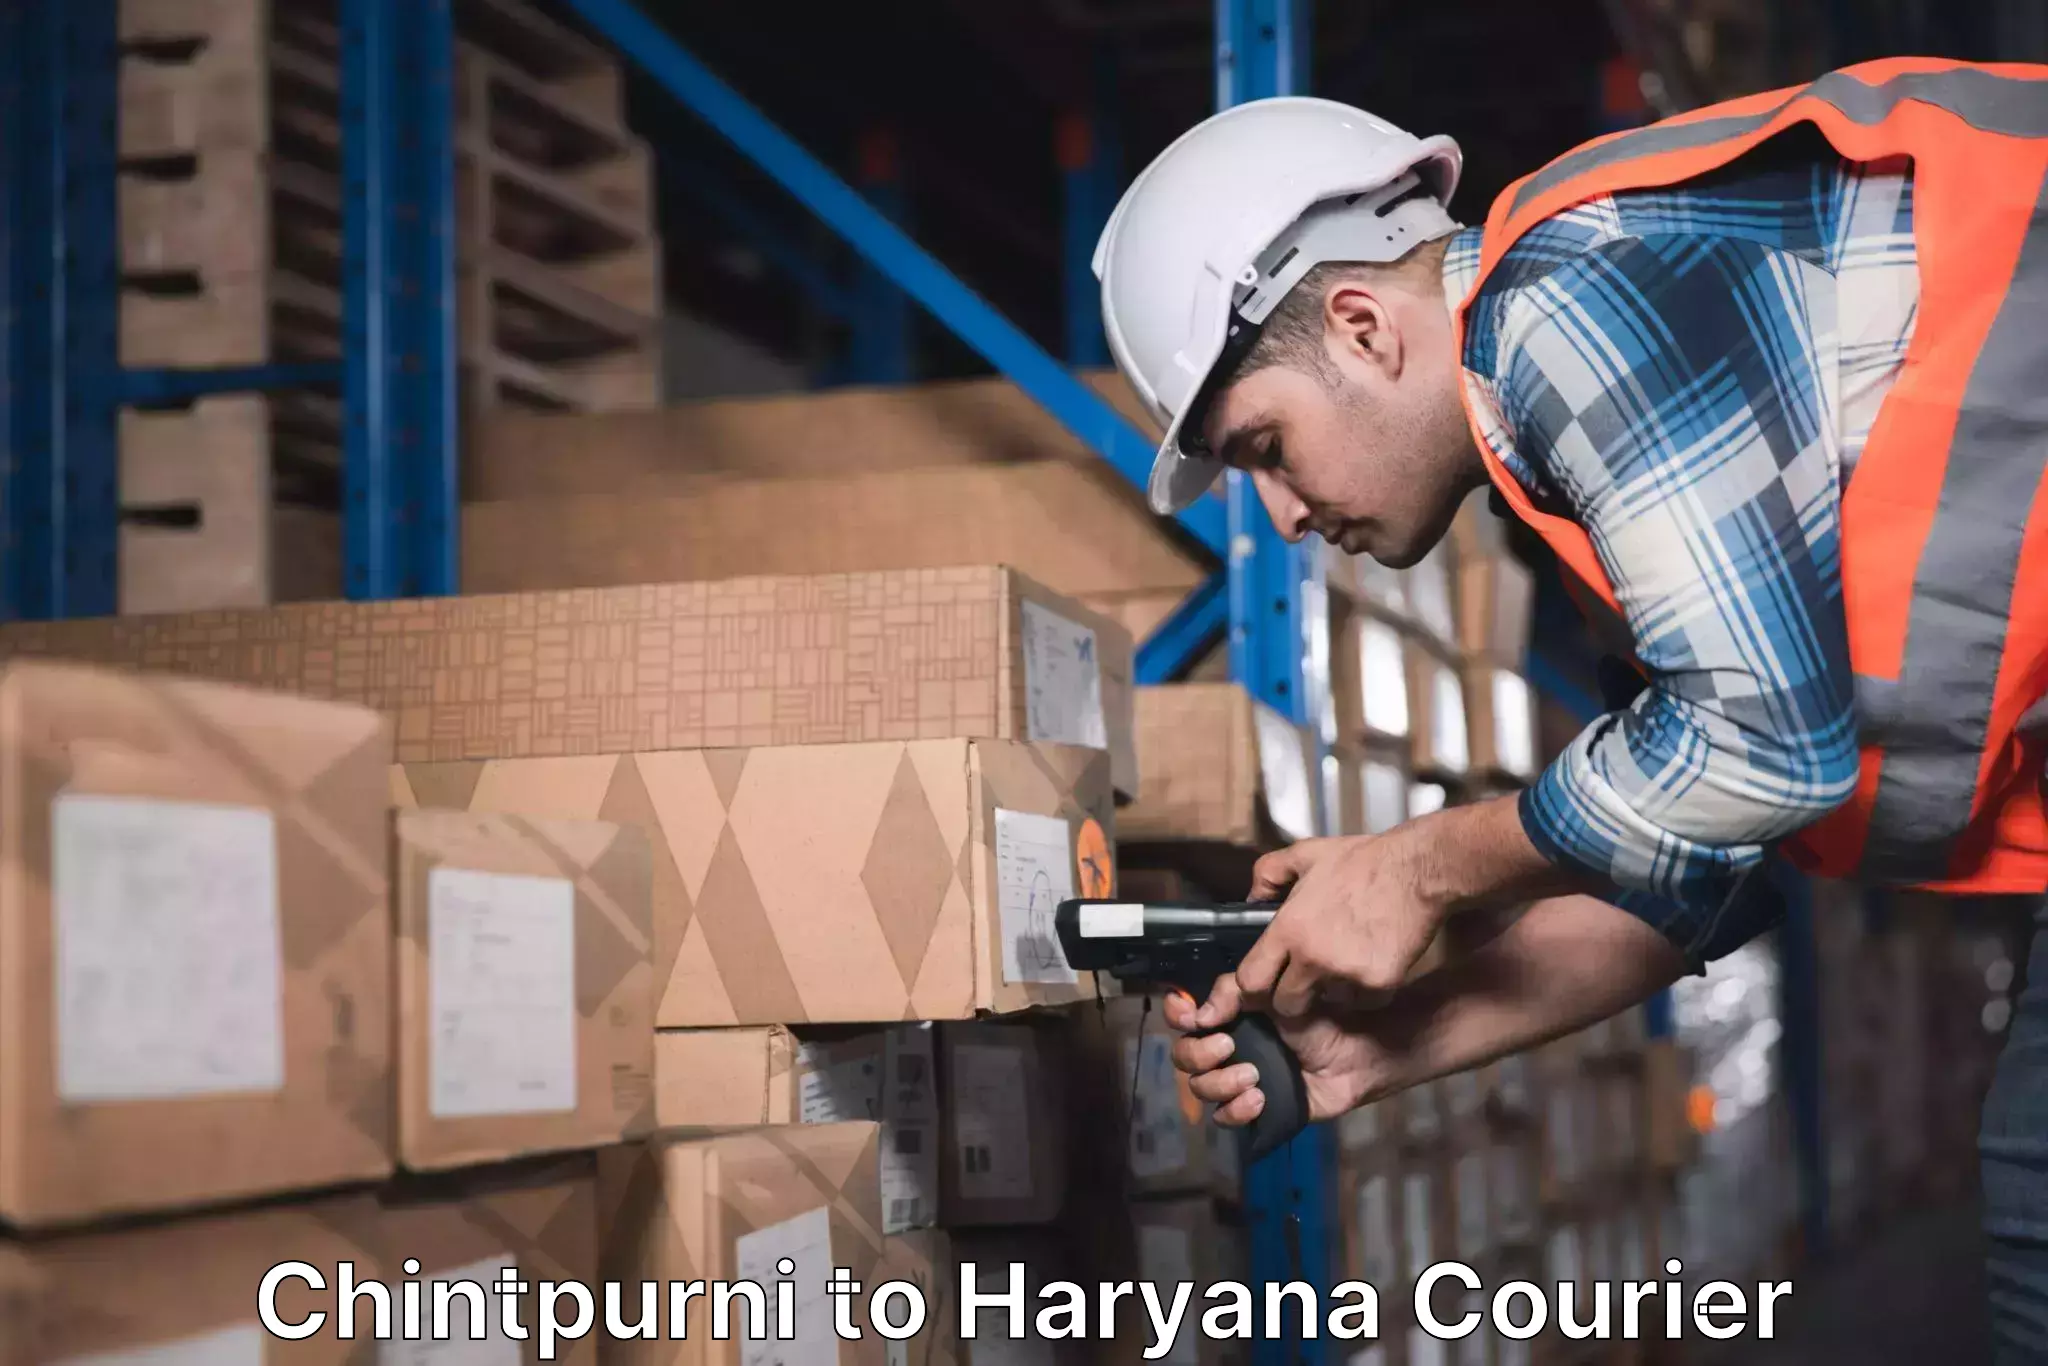 State-of-the-art courier technology Chintpurni to Haryana